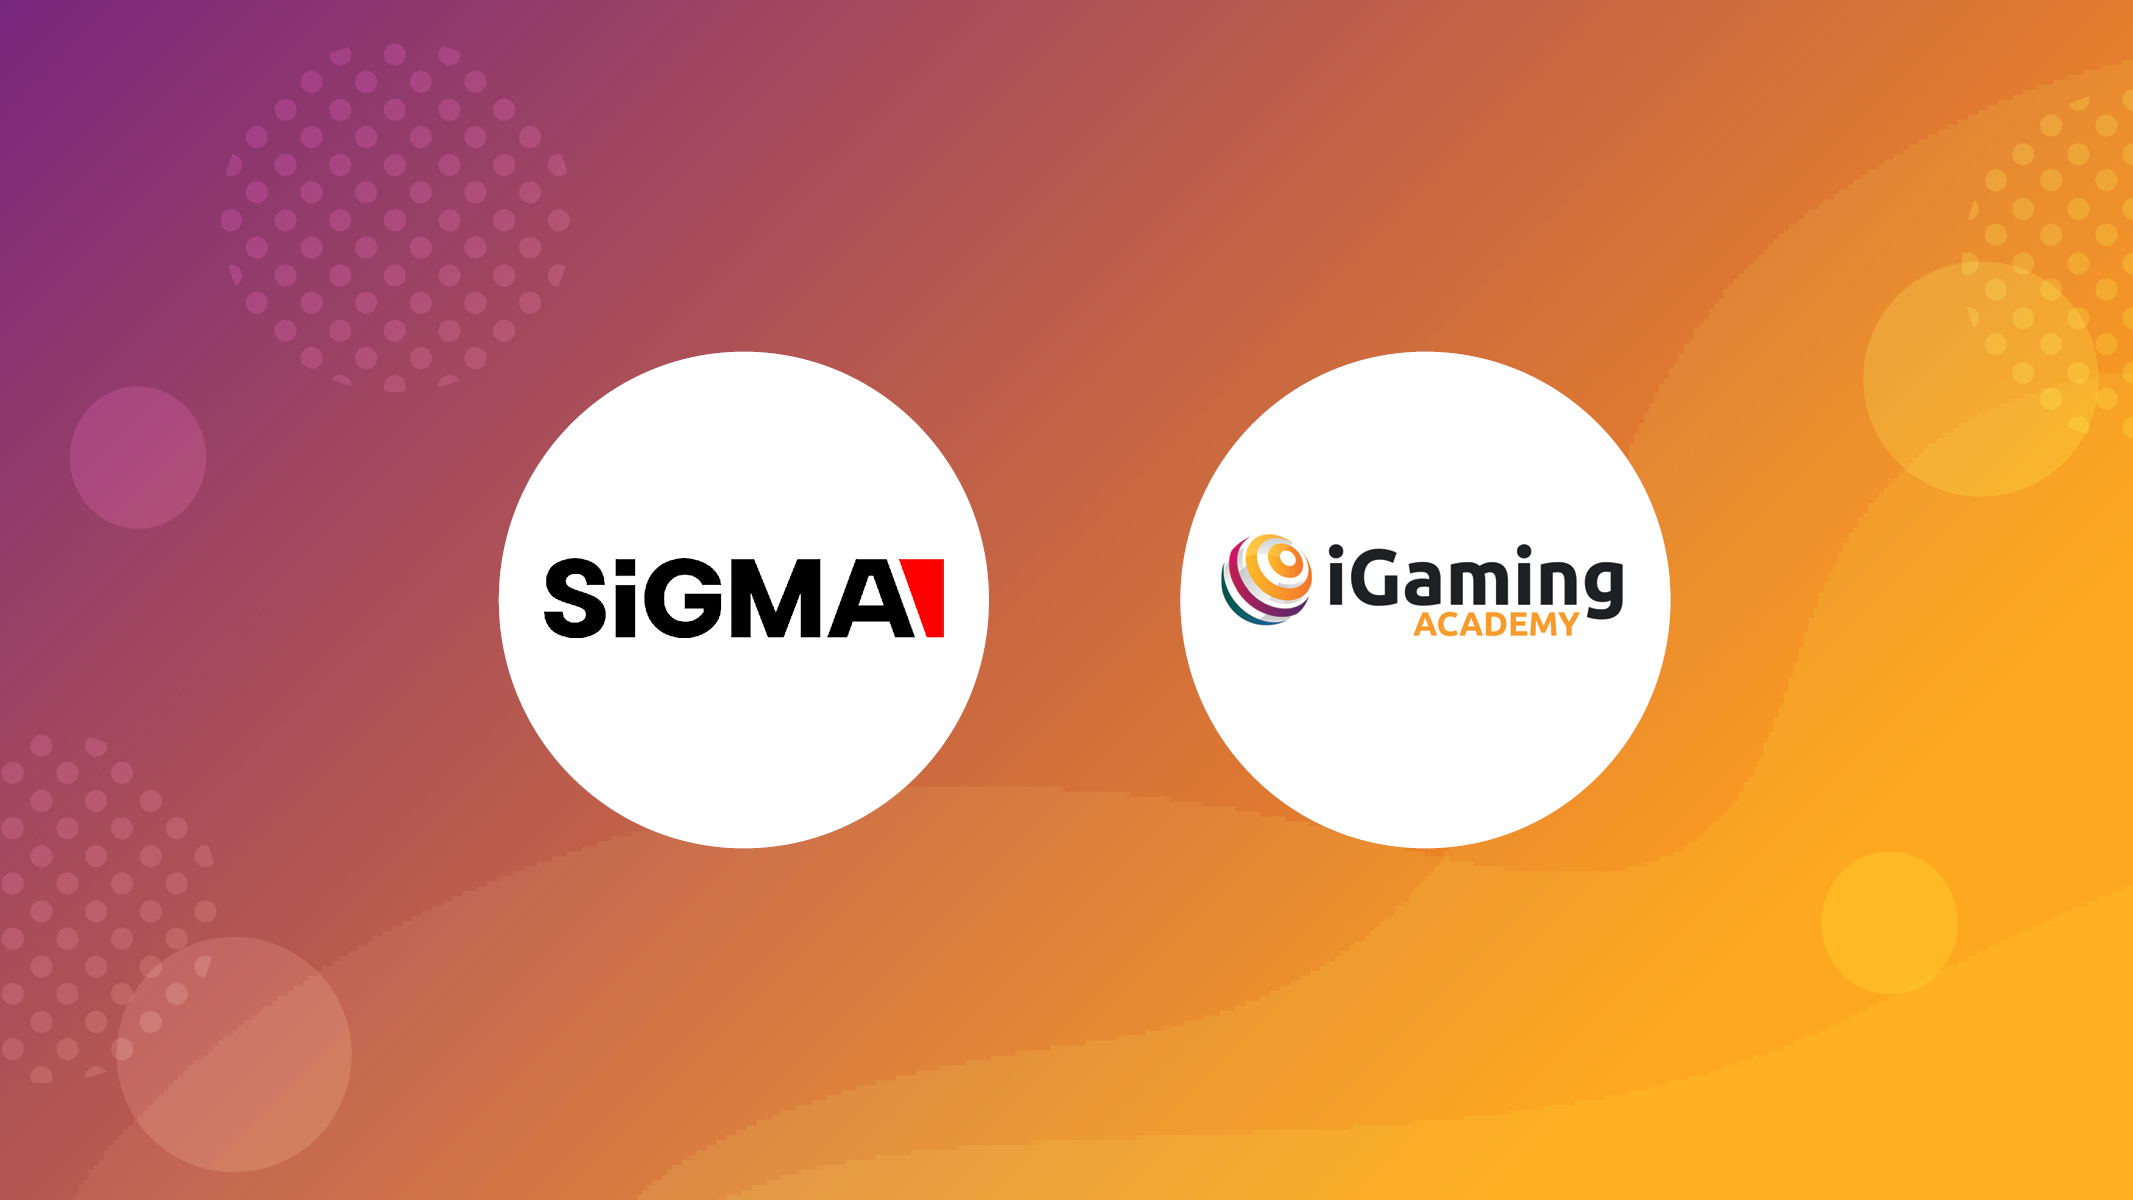 SiGMA Group Acquires A Majority Stake In iGaming Academy.